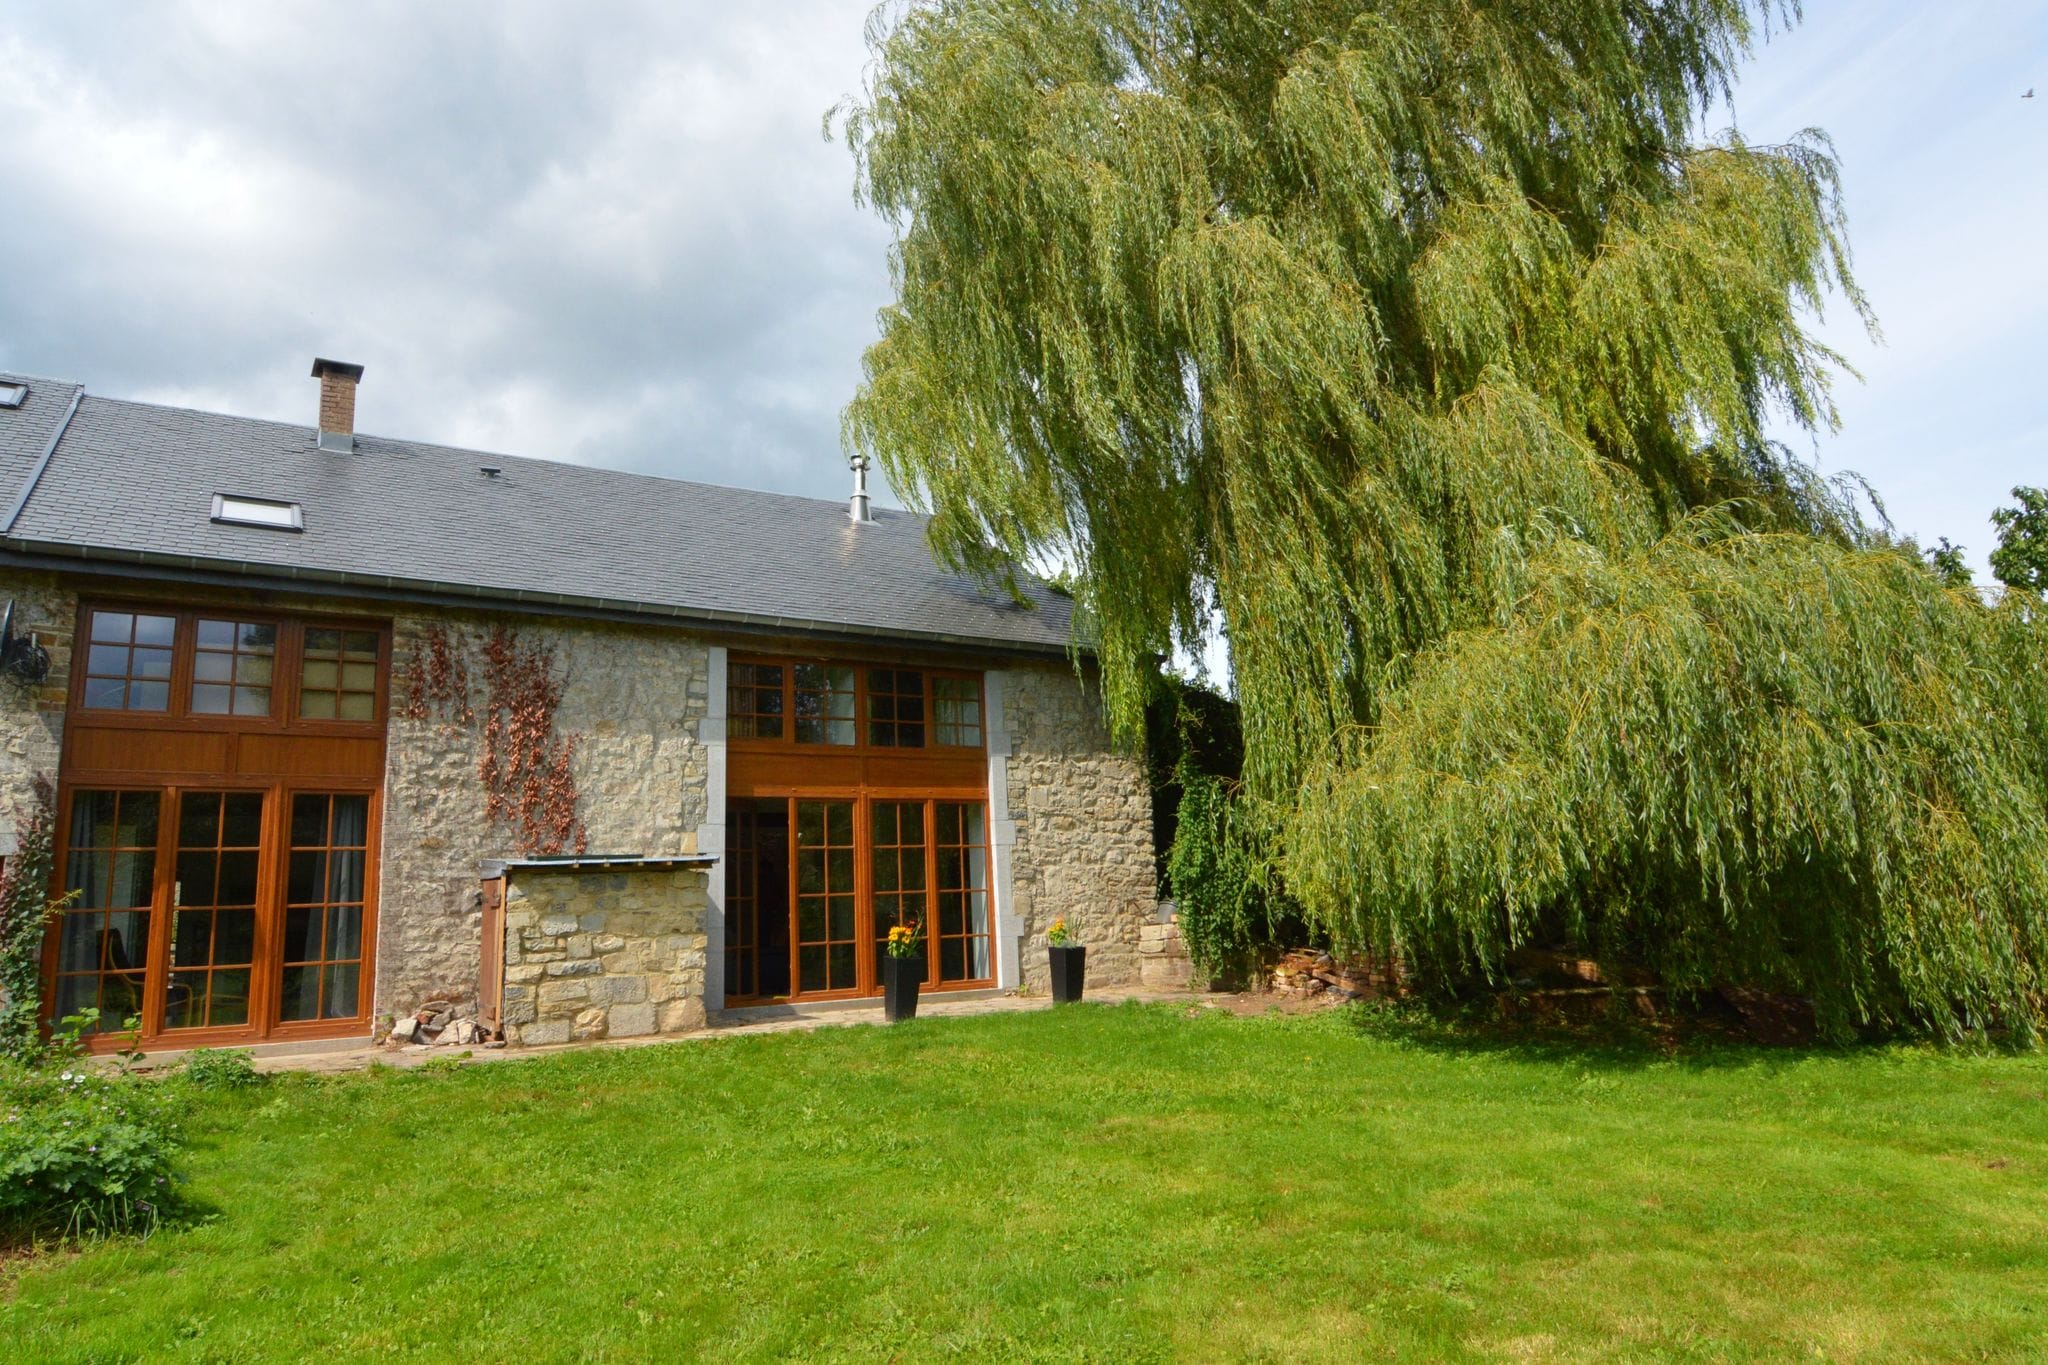 Charming holiday home in Durbuy Bohon near the river